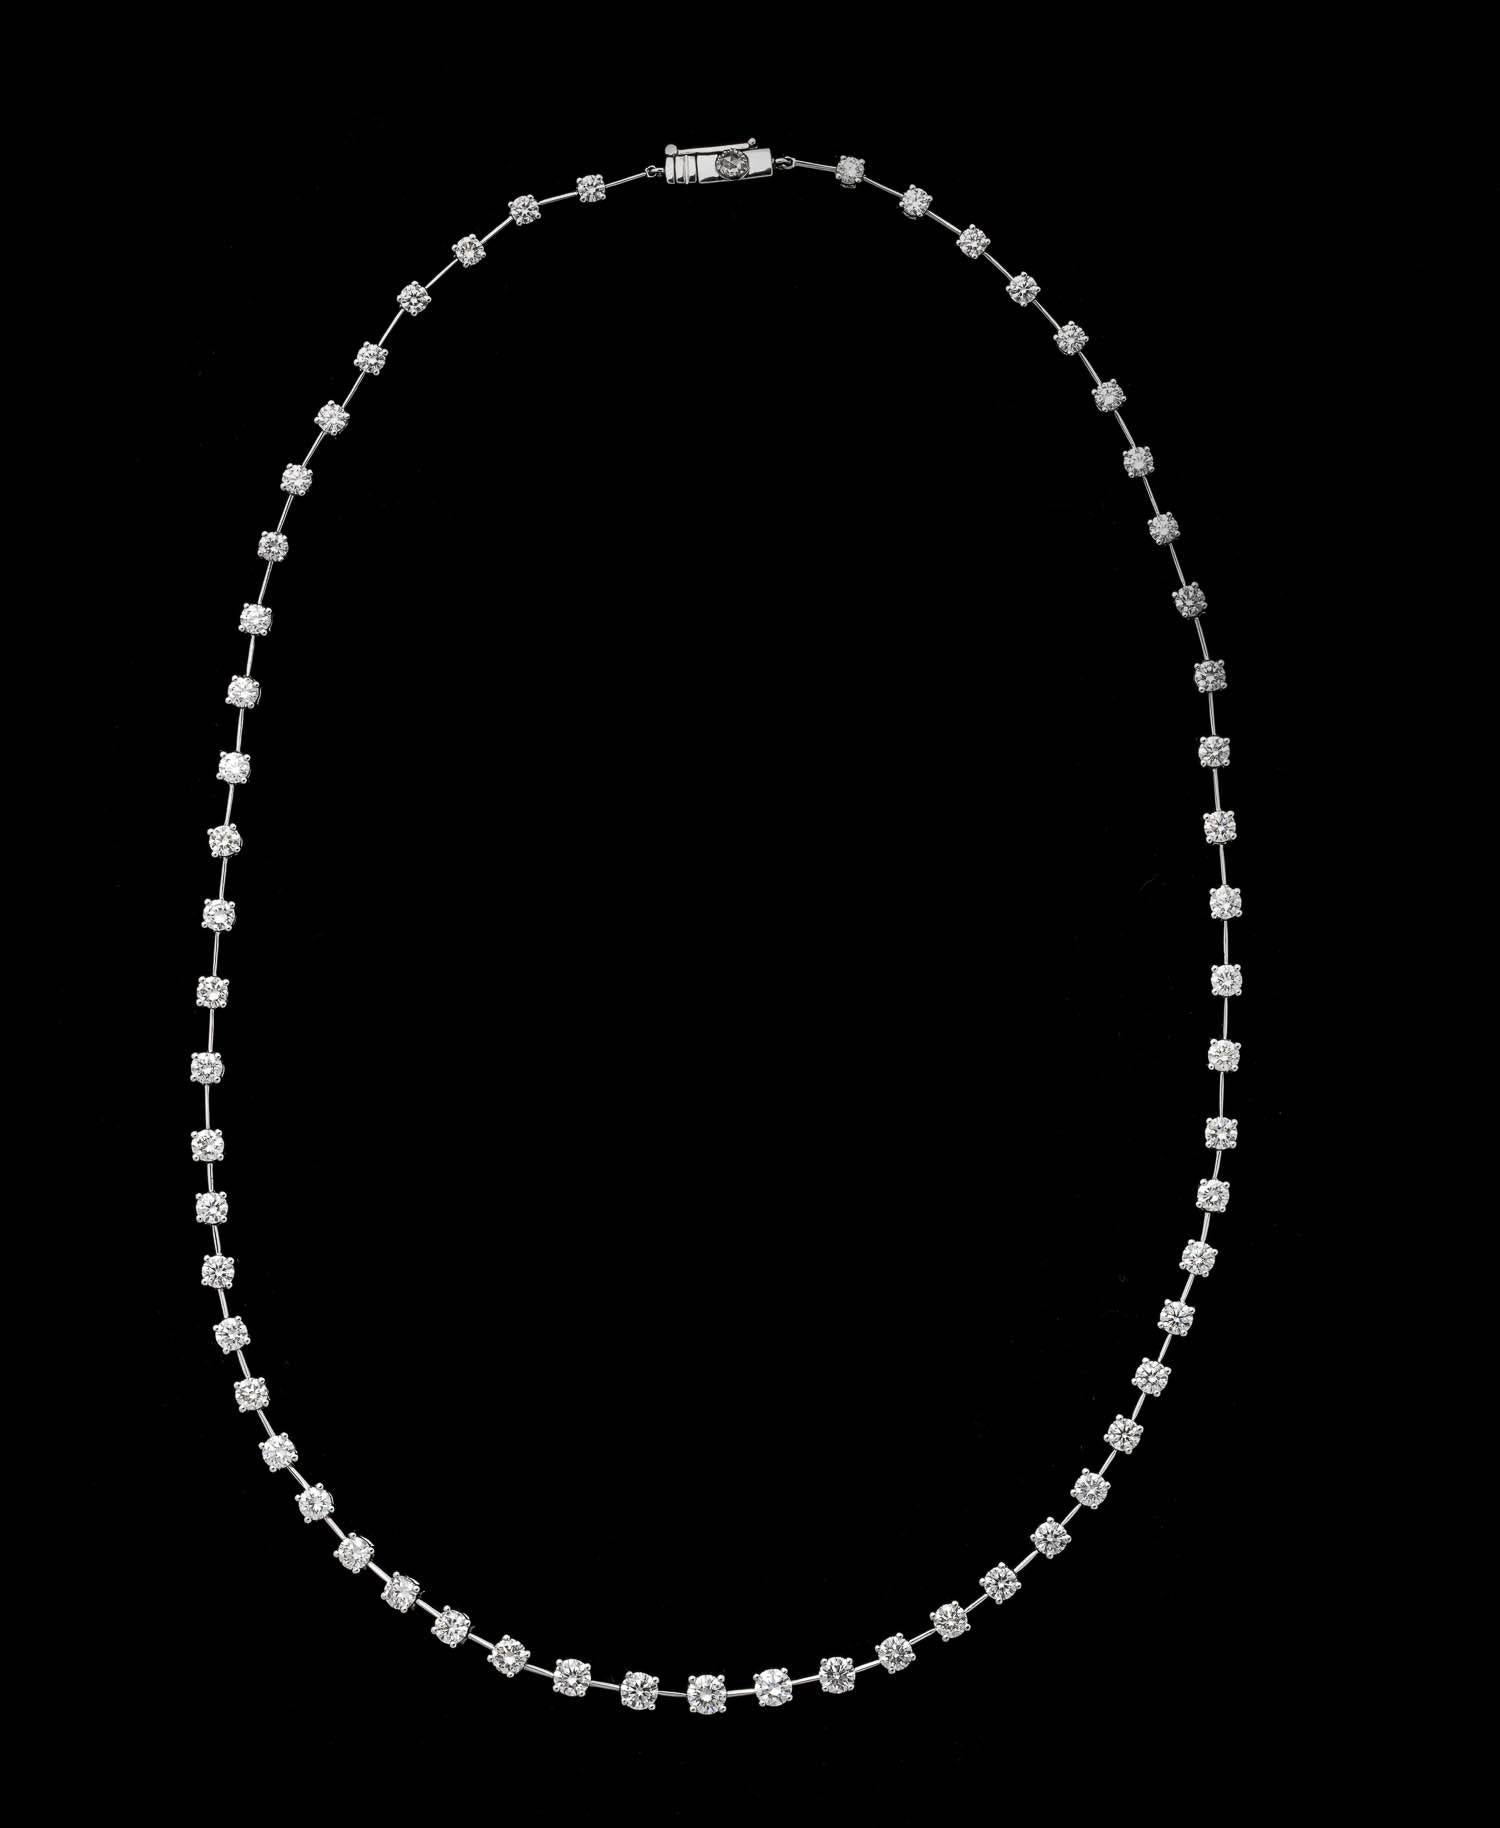 18k white gold segmented necklace ,57 full cut diamonds separated by knife edge gold links with a total weight of 6.30 carats, wonderfully flexible 16.5 grams of 18k gold